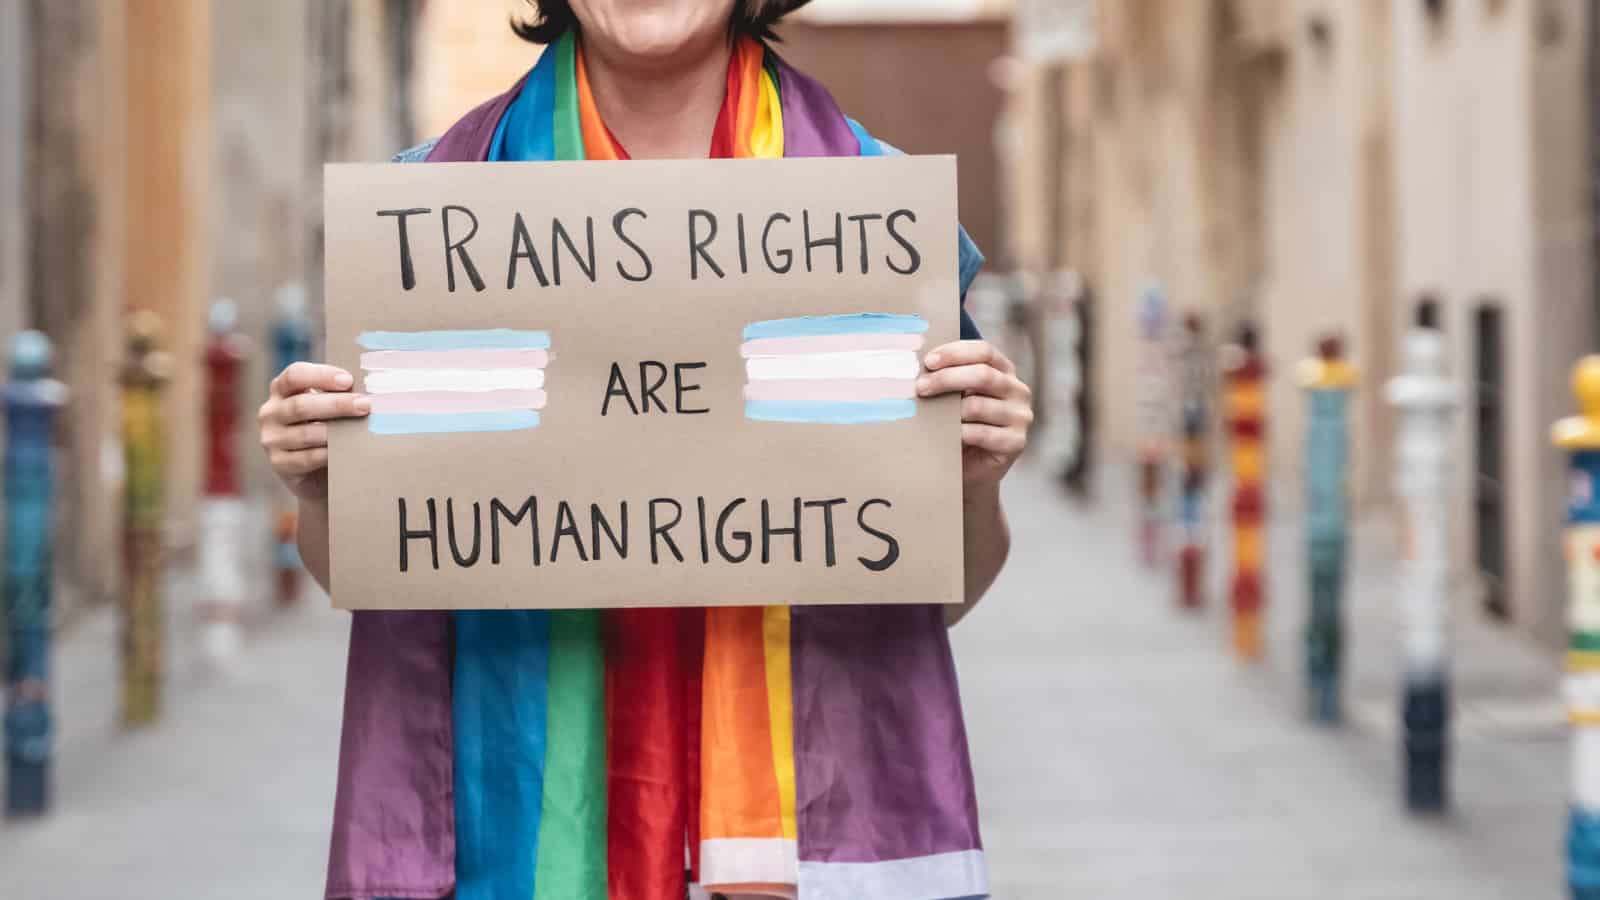 Trans rights are human rights. Person holding trans rights sign.